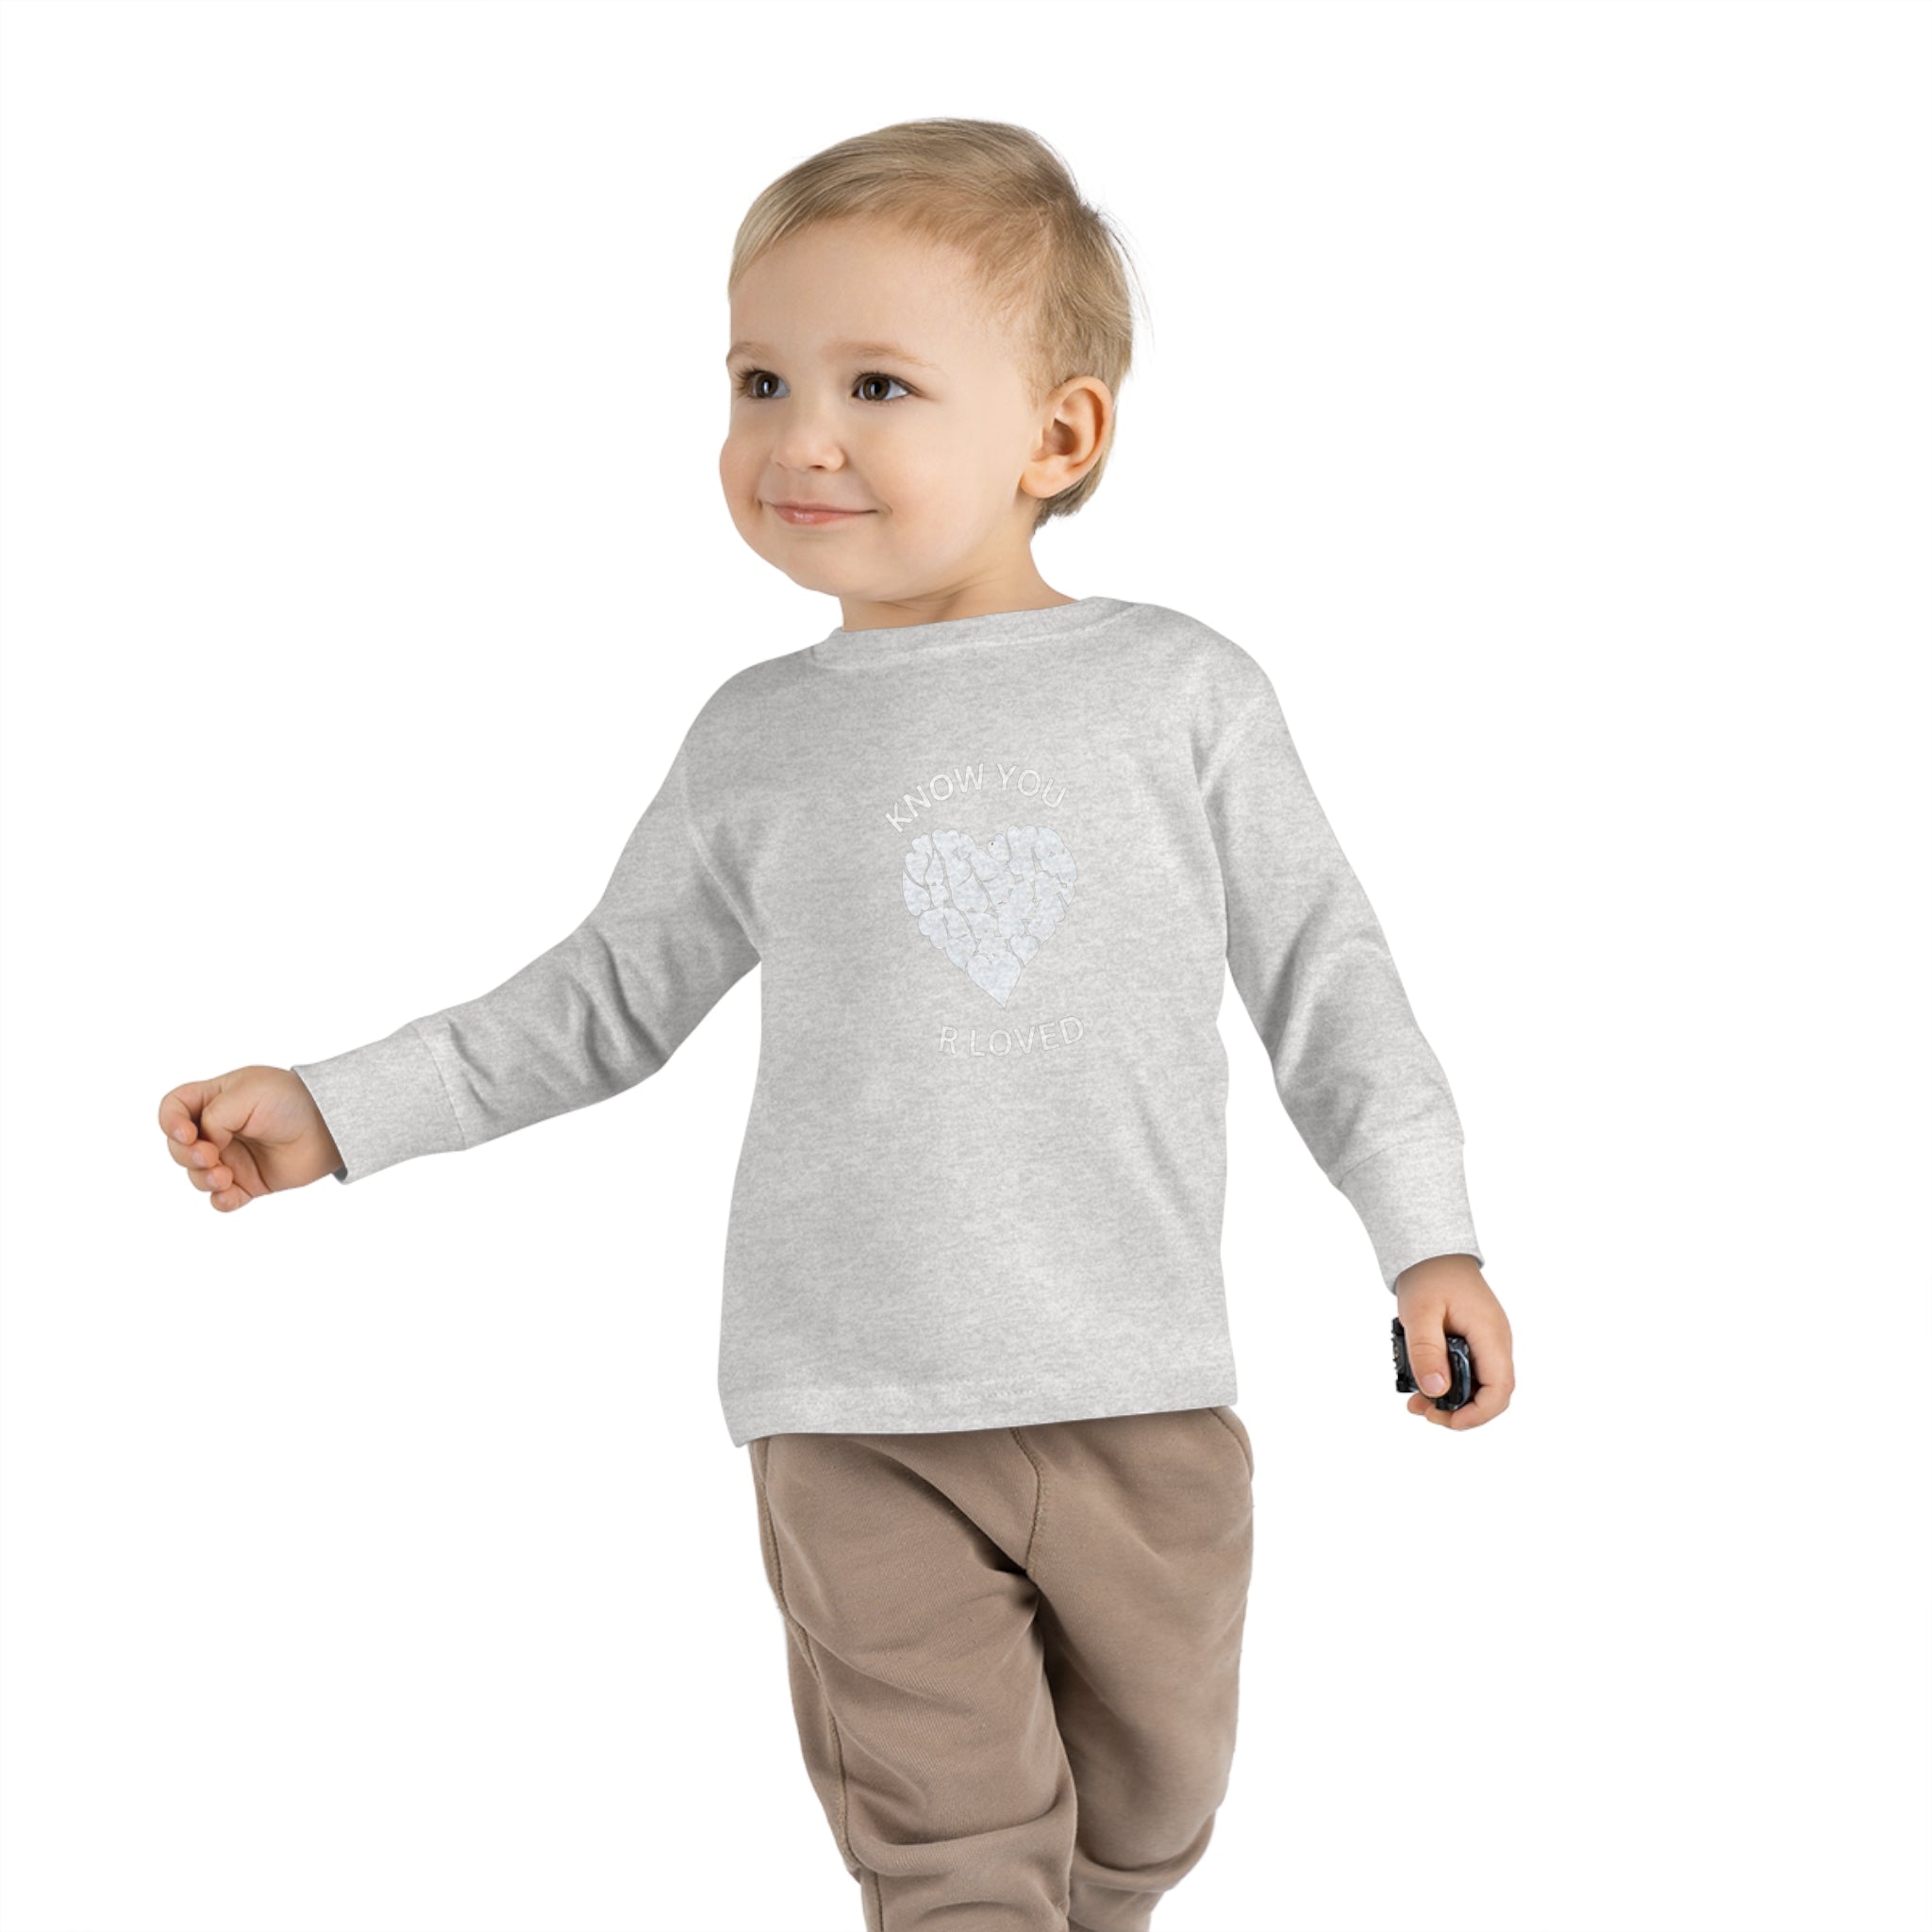 Know You  R Love Toddler Long Sleeve  T-shirt